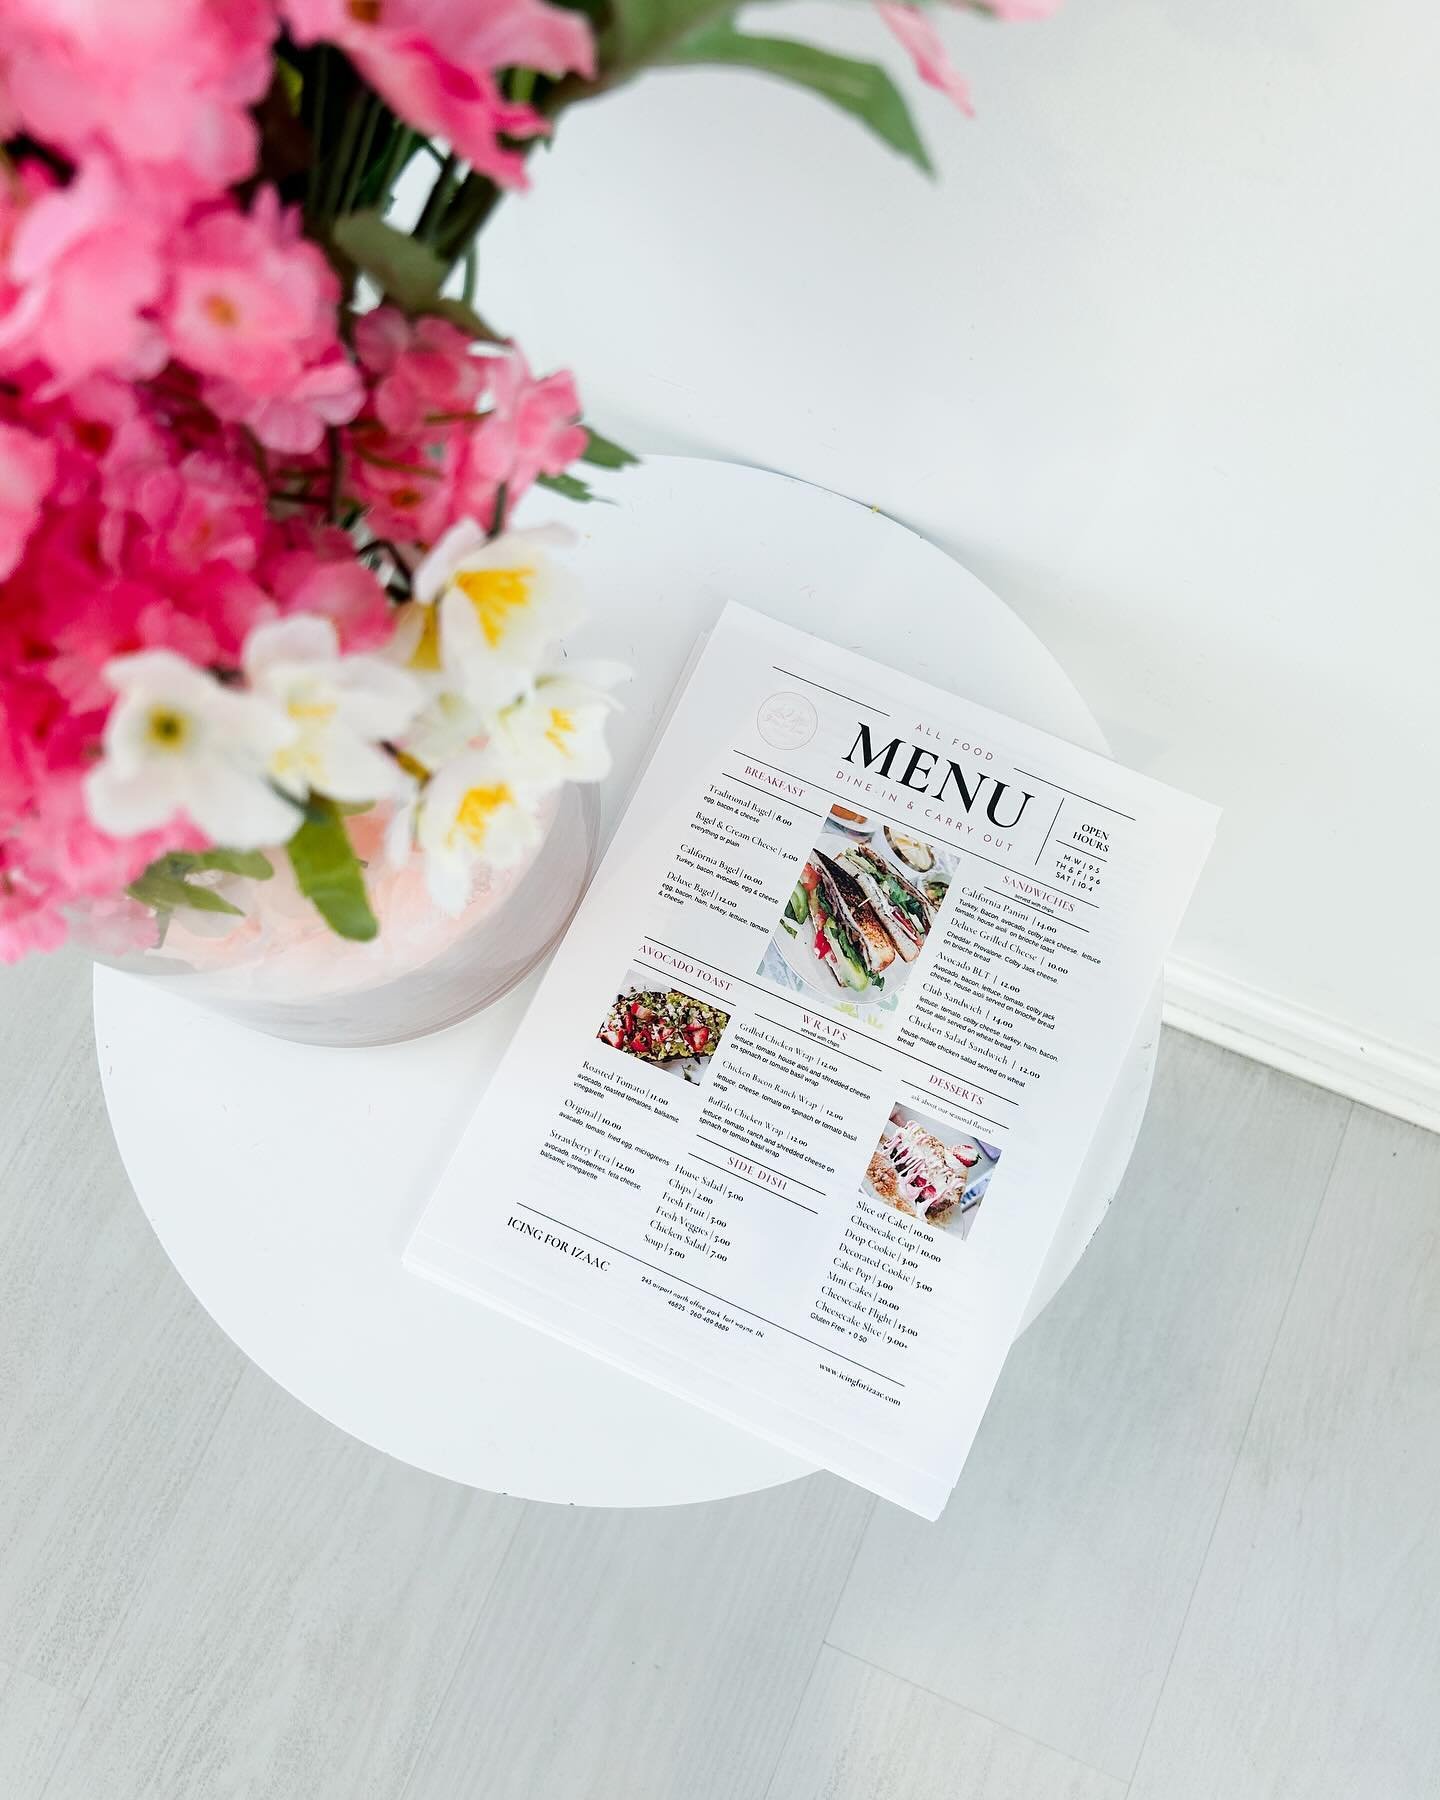 Extra! Extra! Read all about it!!! ✨📰 

Our new menu has been a hit!!! We have been busier than ever! So many groups coming in for lunch &amp; our dining room filling up! I am so thankful for all that is happening &amp; so excited for all that is to